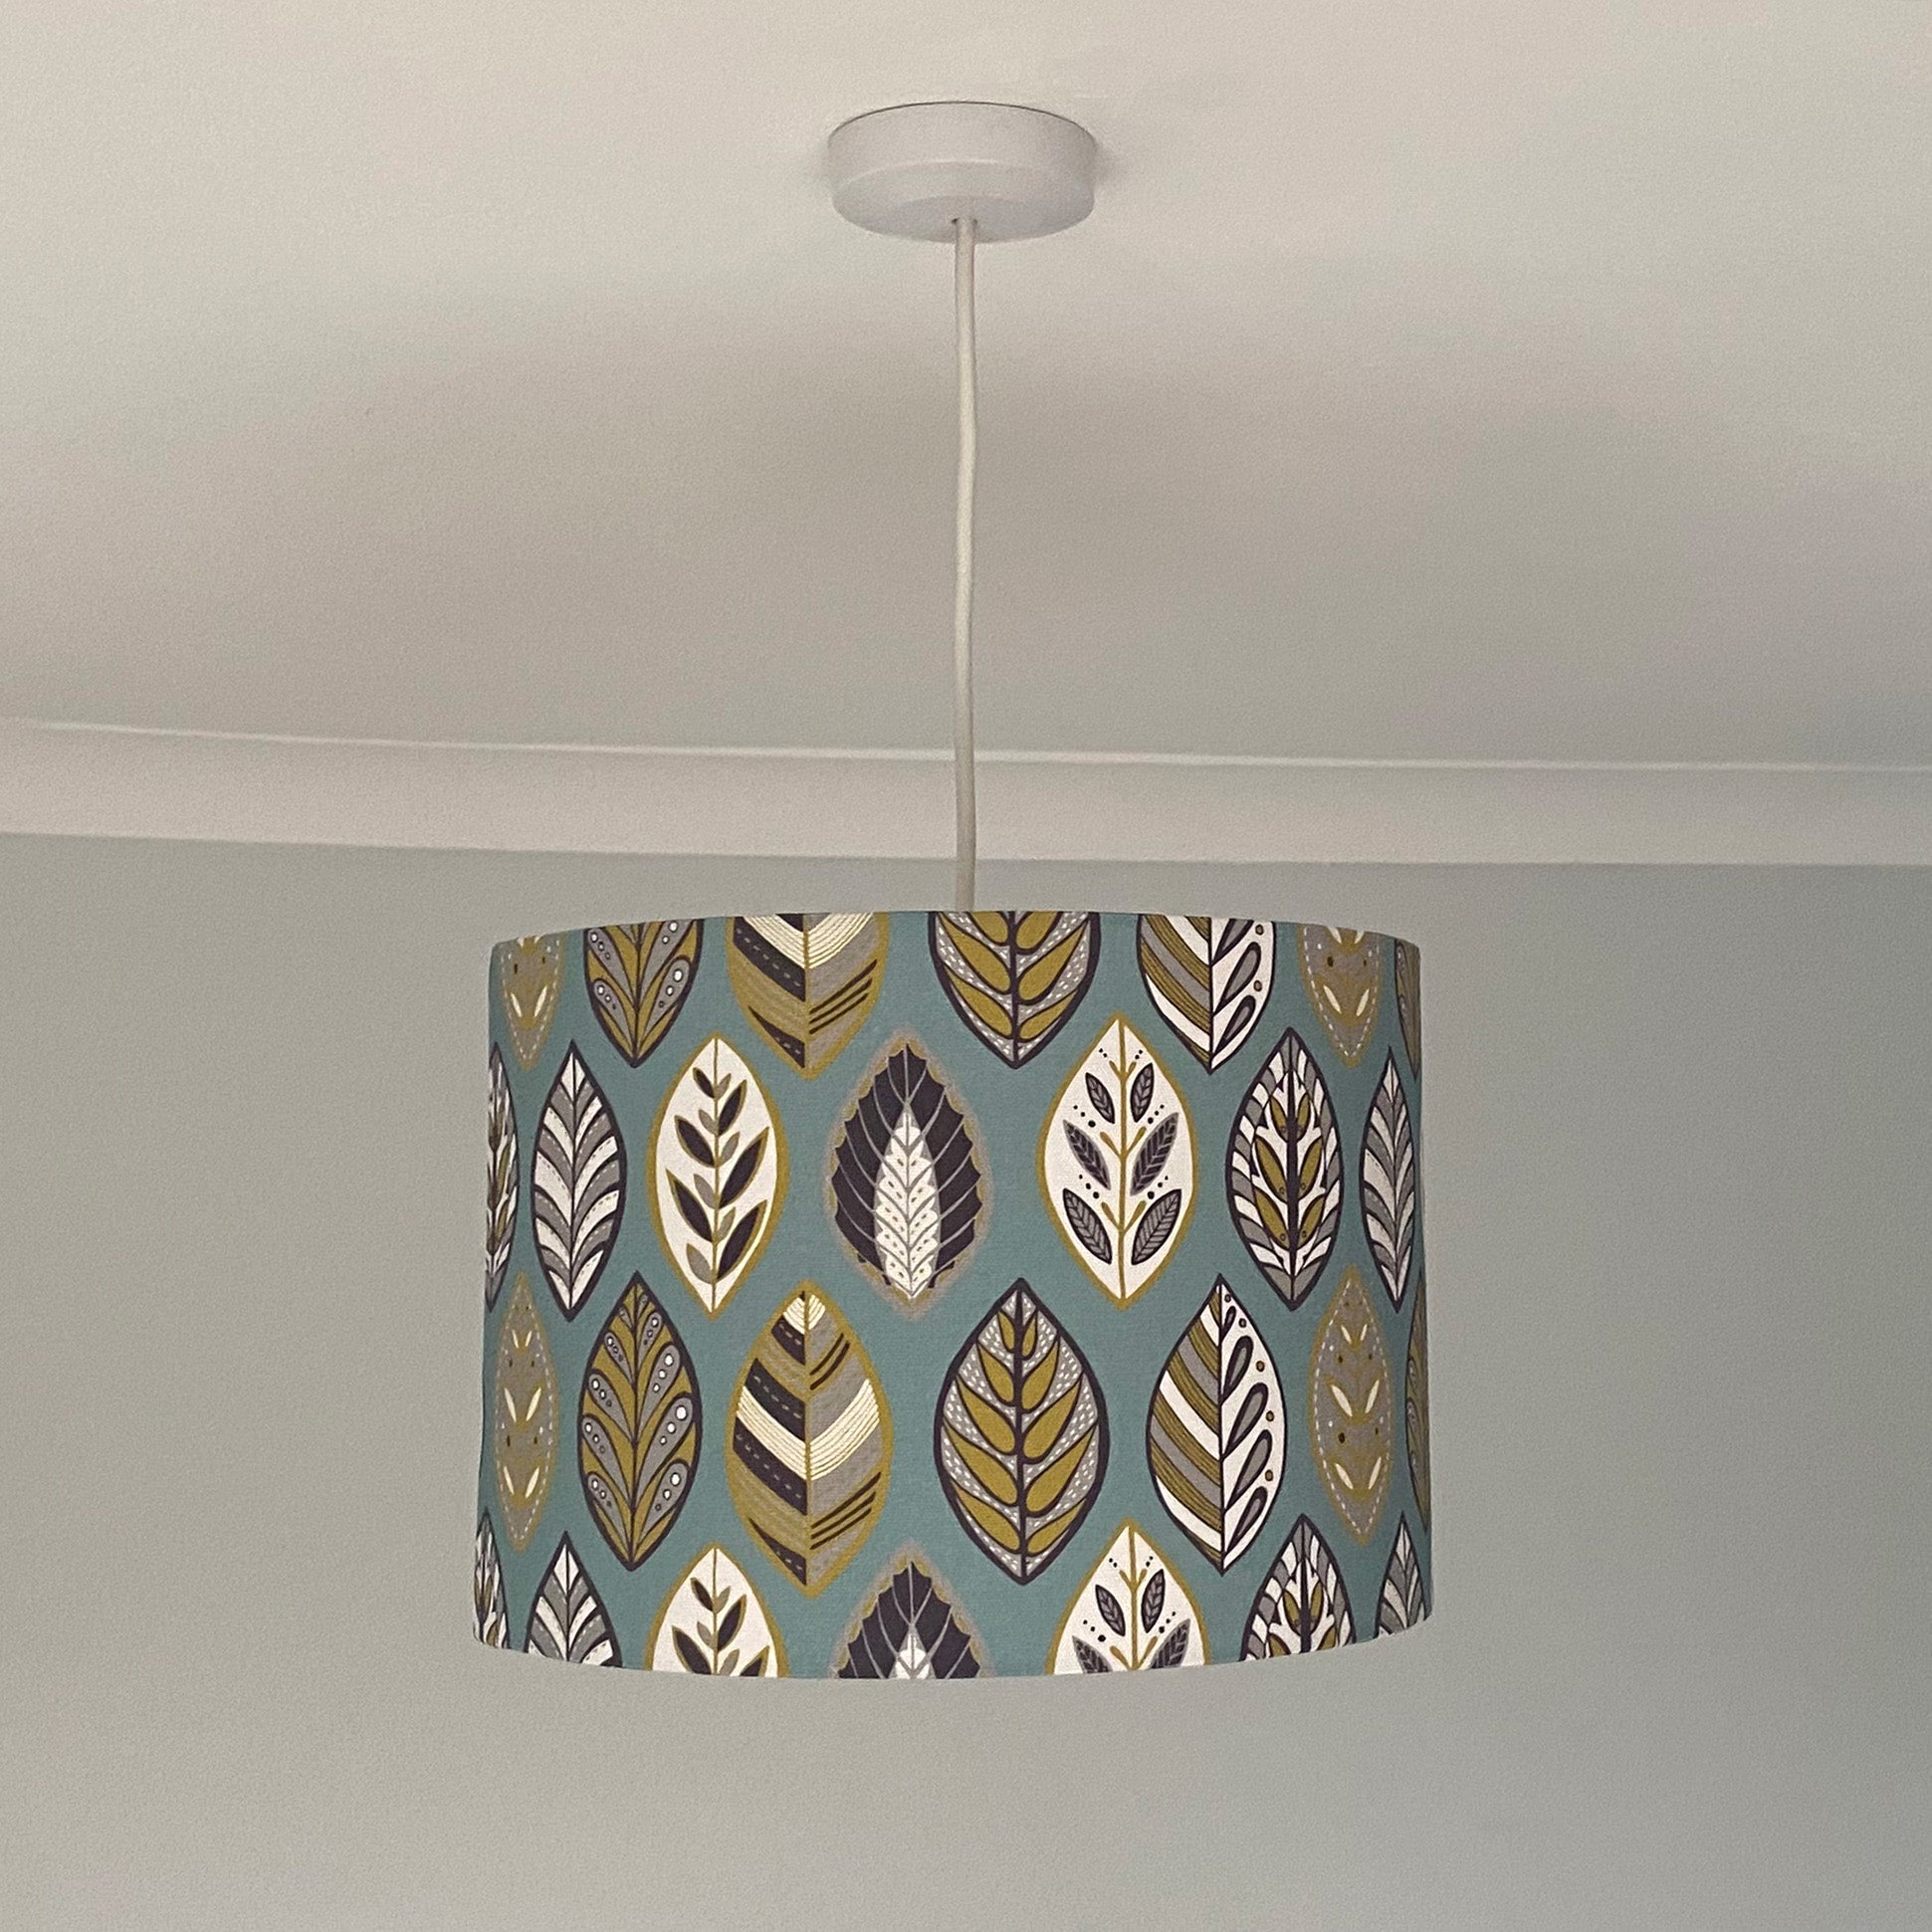 Medium Blue Beech leaf Lampshade, shown here on a ceiling pendant. The pattern features a Skandi style Blue, yellow, grey and white Leaf pattern on a Blue Background.